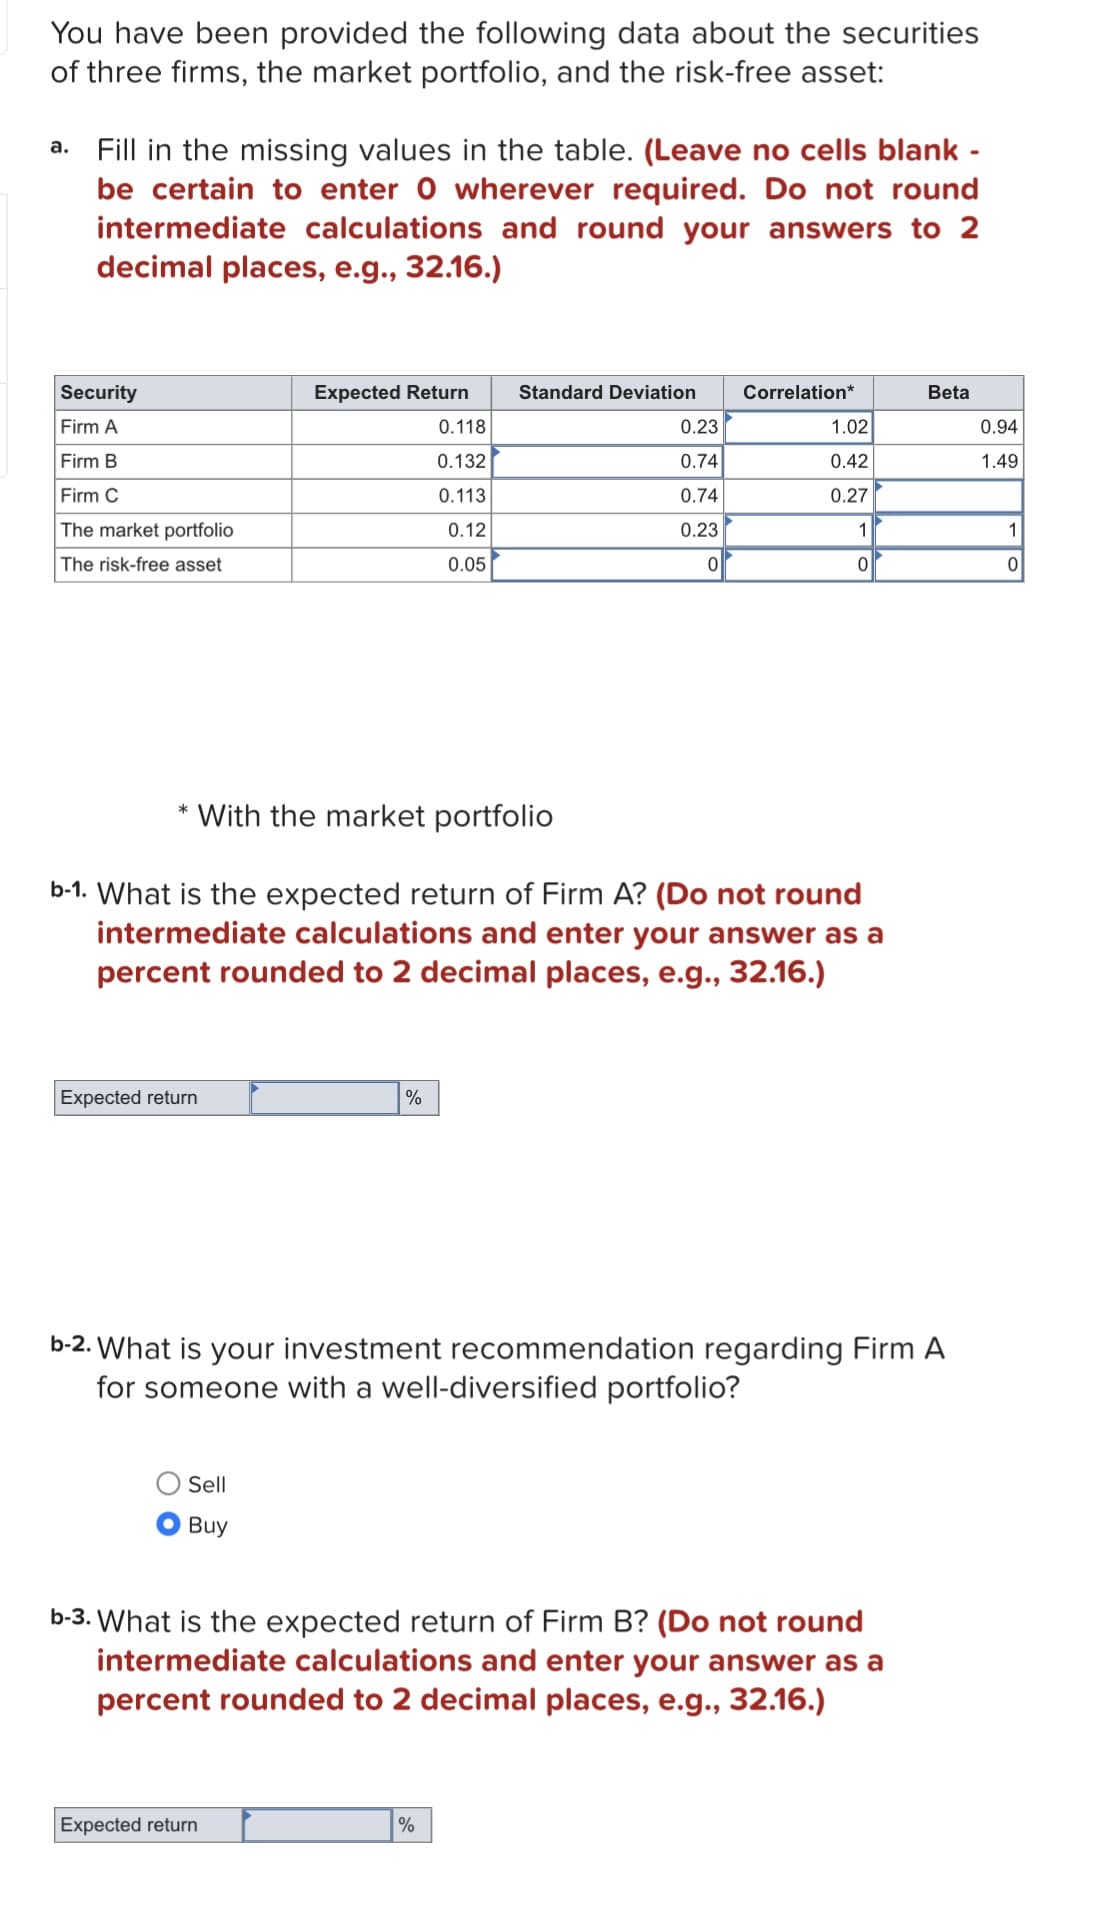 You have been provided the following data about the securities
of three firms, the market portfolio, and the risk-free asset:
a. Fill in the missing values in the table. (Leave no cells blank -
be certain to enter 0 wherever required. Do not round
intermediate calculations and round your answers to 2
decimal places, e.g., 32.16.)
Security
Firm A
Firm B
Firm C
The market portfolio
The risk-free asset
Expected return
Expected Return
* With the market portfolio
Sell
Buy
0.118
0.132
0.113
0.12
0.05
%
Expected return
Standard Deviation
b-1. What is the expected return of Firm A? (Do not round
intermediate calculations and enter your answer as a
percent rounded to 2 decimal places, e.g., 32.16.)
0.23
0.74
0.74
0.23
0
%
Correlation*
1.02
0.42
0.27
1
0
b-2. What is your investment recommendation regarding Firm A
for someone with a well-diversified portfolio?
b-3. What is the expected return of Firm B? (Do not round
intermediate calculations and enter your answer as a
percent rounded to 2 decimal places, e.g., 32.16.)
Beta
0.94
1.49
1
0